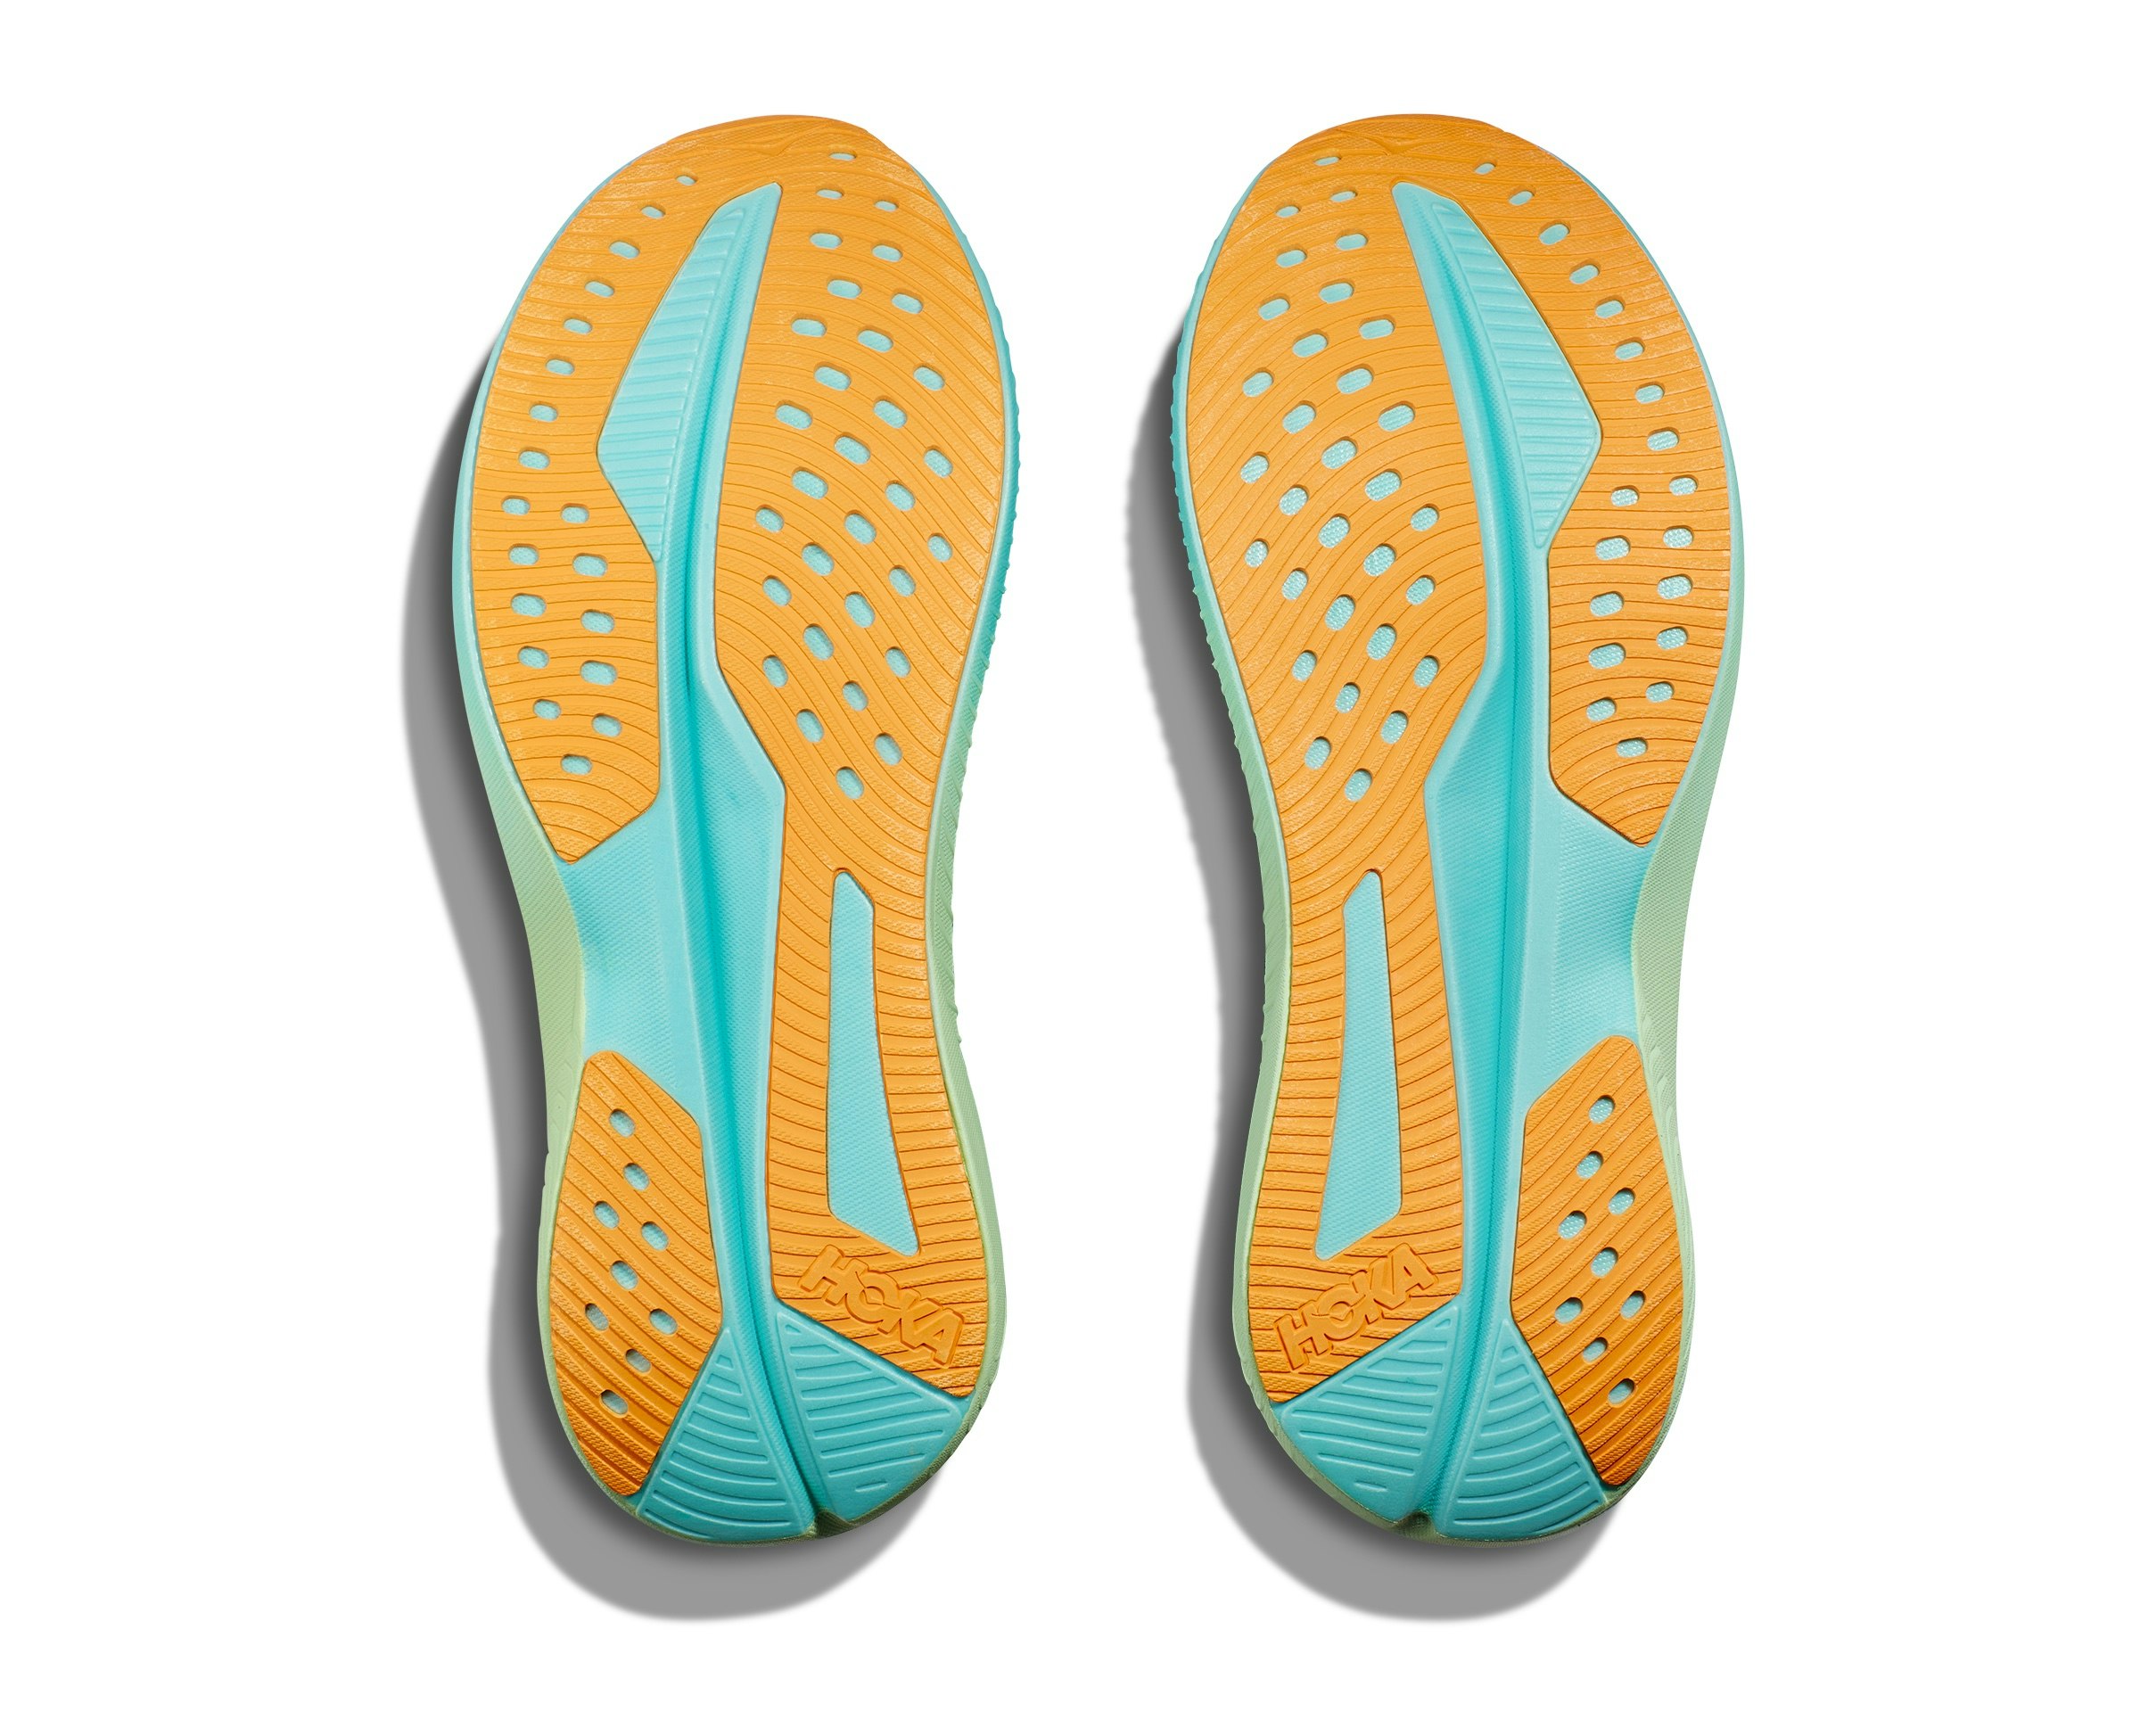 Dural abrasion rubber is used in the outsole